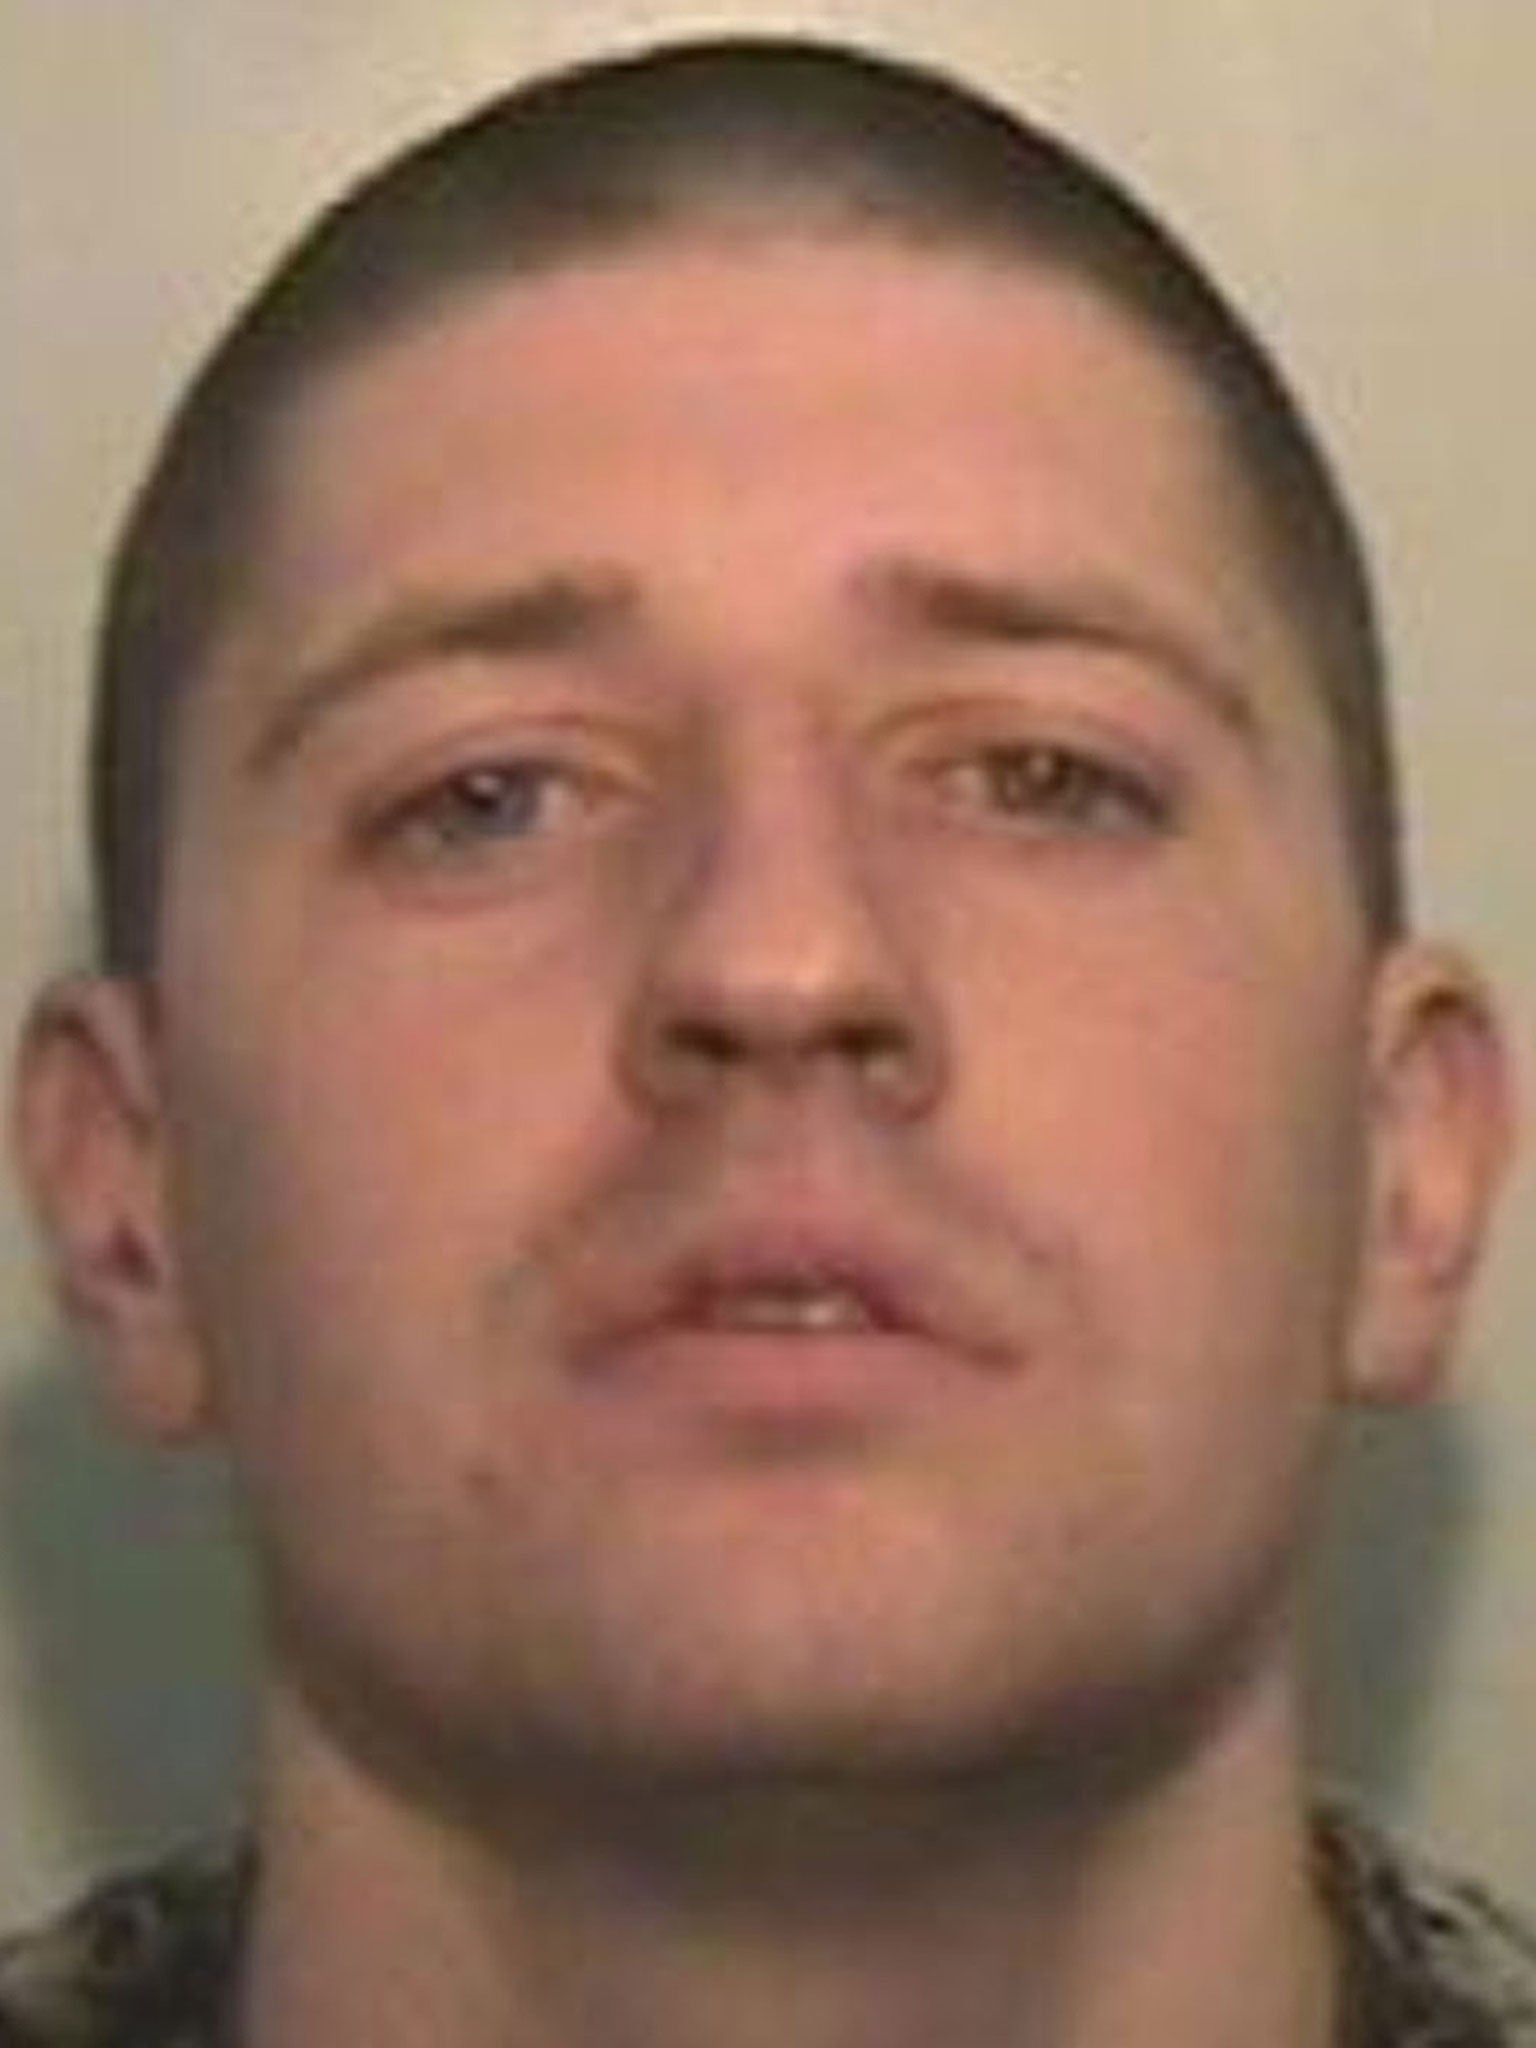 Michael Cope was arrested on Friday night after police were called to an address in Leigh, Greater Manchester